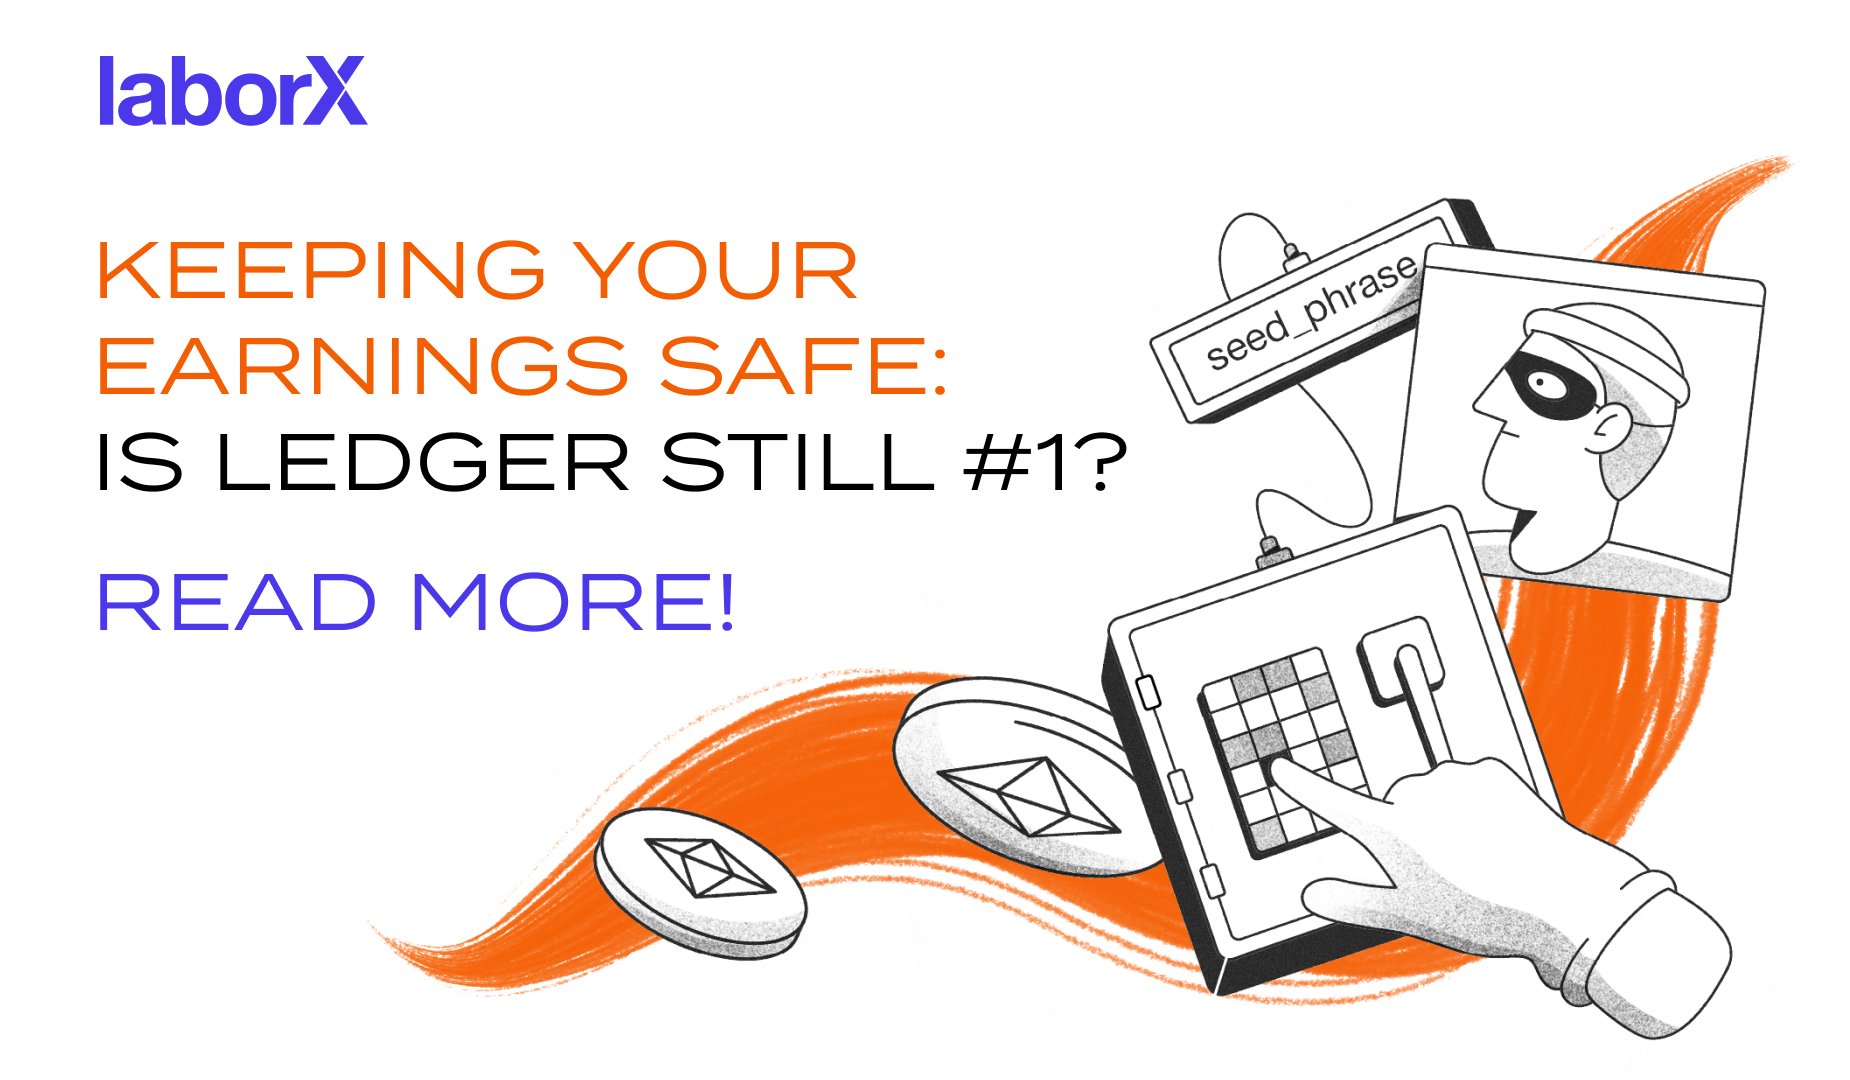 Keeping Your Earnings Safe: Is Ledger Still #1?